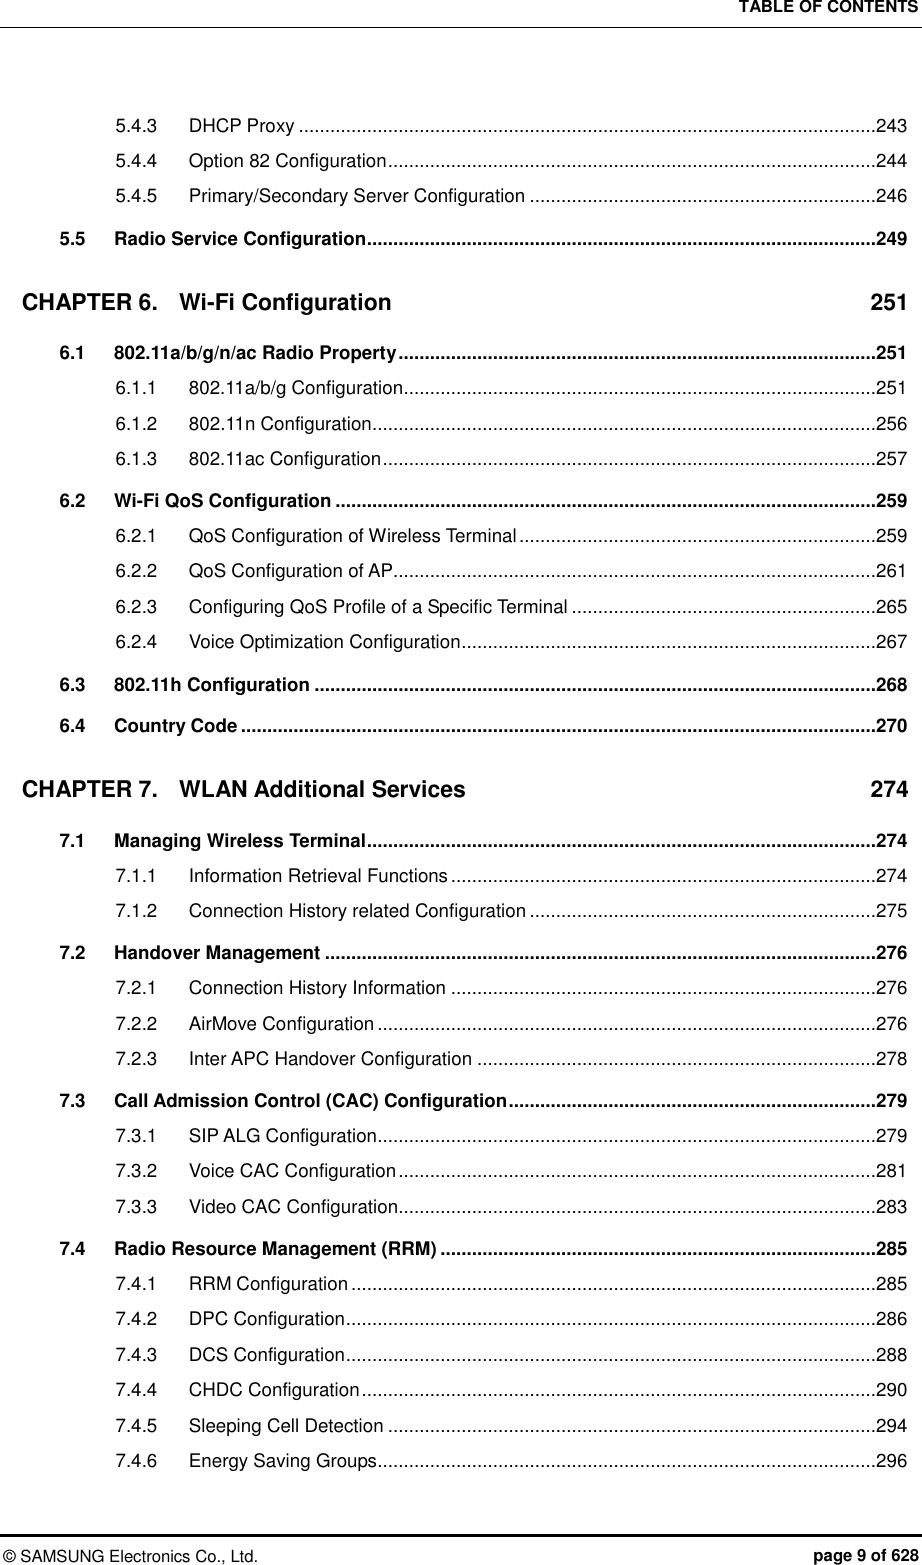 TABLE OF CONTENTS ©  SAMSUNG Electronics Co., Ltd.  page 9 of 628 5.4.3 DHCP Proxy ..............................................................................................................243 5.4.4 Option 82 Configuration .............................................................................................244 5.4.5 Primary/Secondary Server Configuration ..................................................................246 5.5 Radio Service Configuration .................................................................................................249 CHAPTER 6. Wi-Fi Configuration  251 6.1 802.11a/b/g/n/ac Radio Property ...........................................................................................251 6.1.1 802.11a/b/g Configuration ..........................................................................................251 6.1.2 802.11n Configuration ................................................................................................256 6.1.3 802.11ac Configuration ..............................................................................................257 6.2 Wi-Fi QoS Configuration .......................................................................................................259 6.2.1 QoS Configuration of Wireless Terminal ....................................................................259 6.2.2 QoS Configuration of AP............................................................................................261 6.2.3 Configuring QoS Profile of a Specific Terminal ..........................................................265 6.2.4 Voice Optimization Configuration ...............................................................................267 6.3 802.11h Configuration ...........................................................................................................268 6.4 Country Code .........................................................................................................................270 CHAPTER 7. WLAN Additional Services  274 7.1 Managing Wireless Terminal .................................................................................................274 7.1.1 Information Retrieval Functions .................................................................................274 7.1.2 Connection History related Configuration ..................................................................275 7.2 Handover Management .........................................................................................................276 7.2.1 Connection History Information .................................................................................276 7.2.2 AirMove Configuration ...............................................................................................276 7.2.3 Inter APC Handover Configuration ............................................................................278 7.3 Call Admission Control (CAC) Configuration ......................................................................279 7.3.1 SIP ALG Configuration ...............................................................................................279 7.3.2 Voice CAC Configuration ...........................................................................................281 7.3.3 Video CAC Configuration ...........................................................................................283 7.4 Radio Resource Management (RRM) ...................................................................................285 7.4.1 RRM Configuration ....................................................................................................285 7.4.2 DPC Configuration .....................................................................................................286 7.4.3 DCS Configuration .....................................................................................................288 7.4.4 CHDC Configuration ..................................................................................................290 7.4.5 Sleeping Cell Detection .............................................................................................294 7.4.6 Energy Saving Groups ...............................................................................................296 